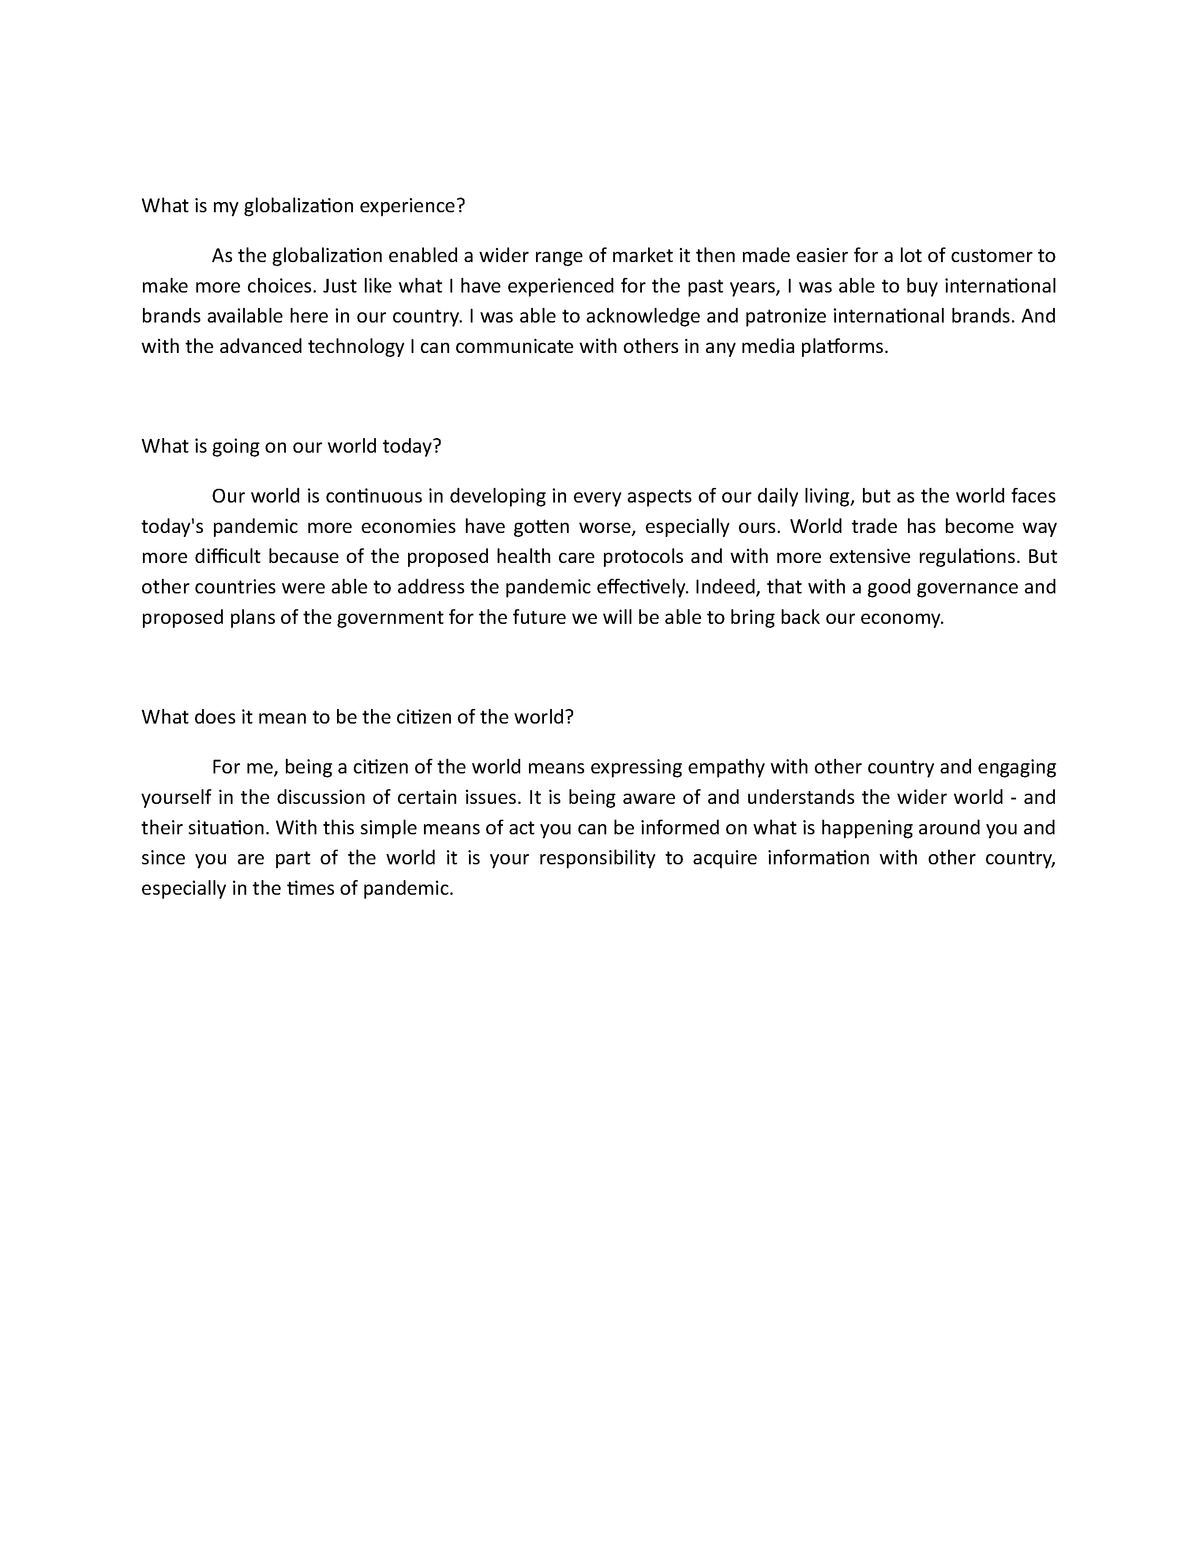 what is globalization as a student essay